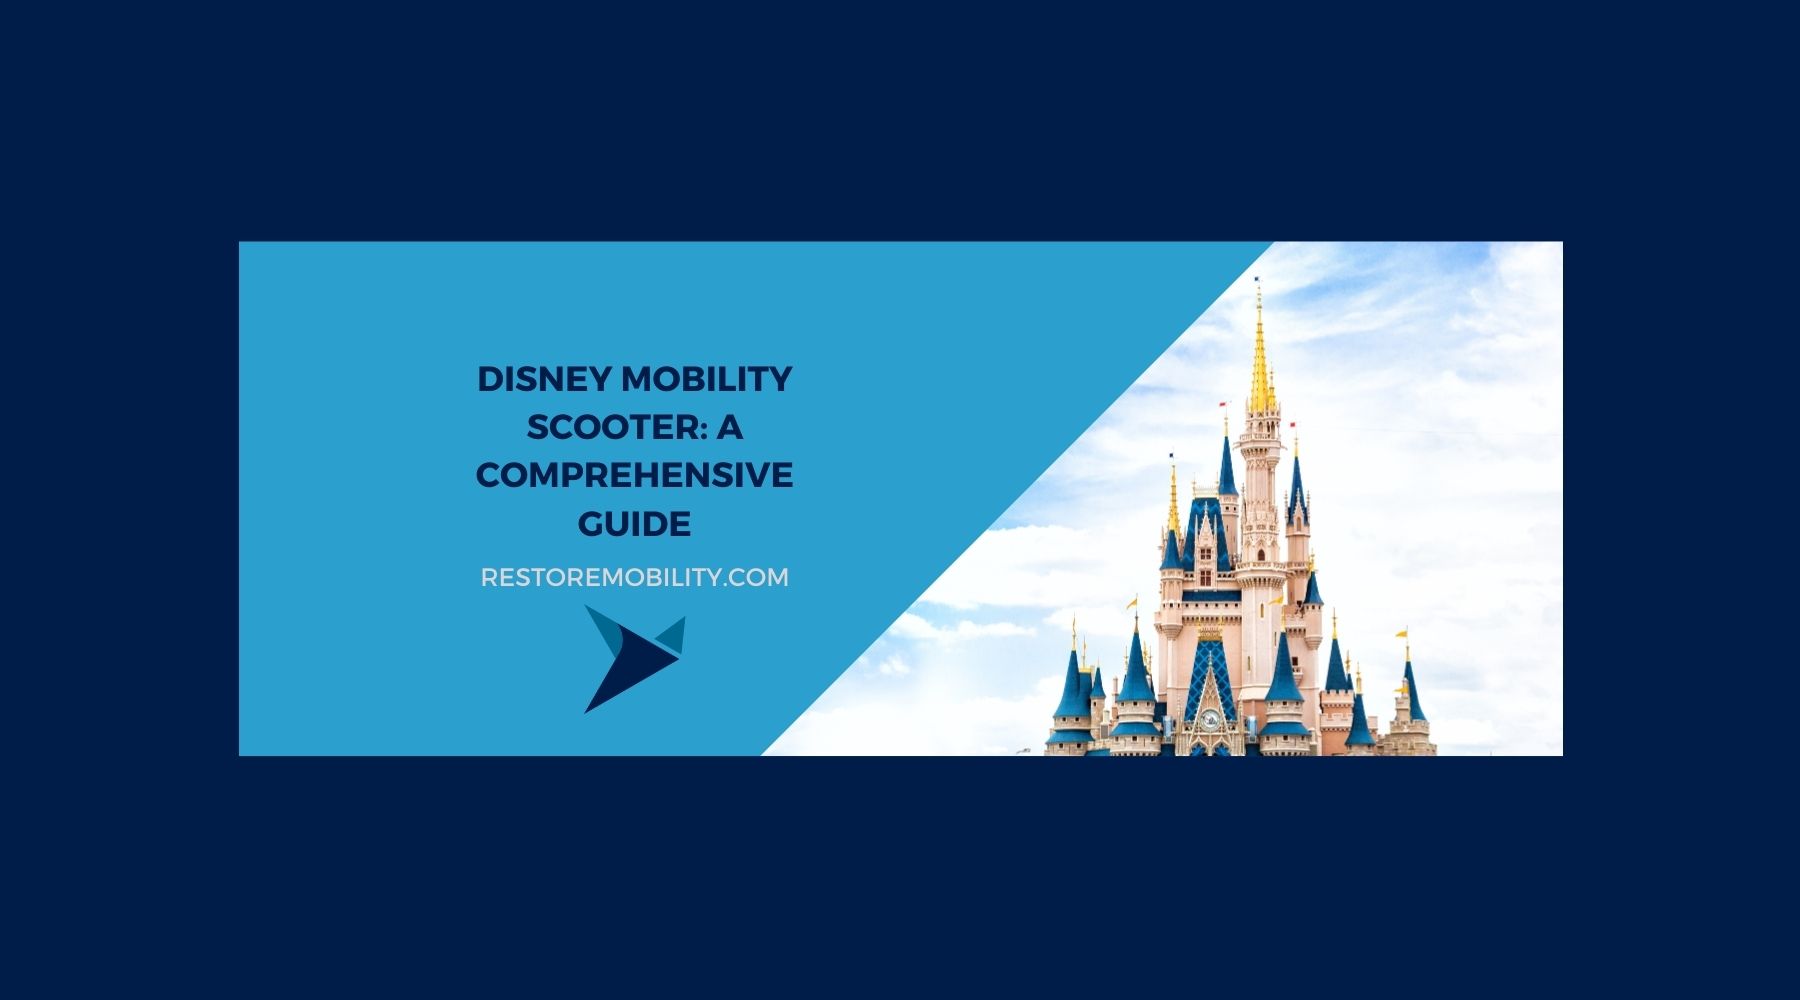 Disney Mobility Scooter: A Comprehensive Guide